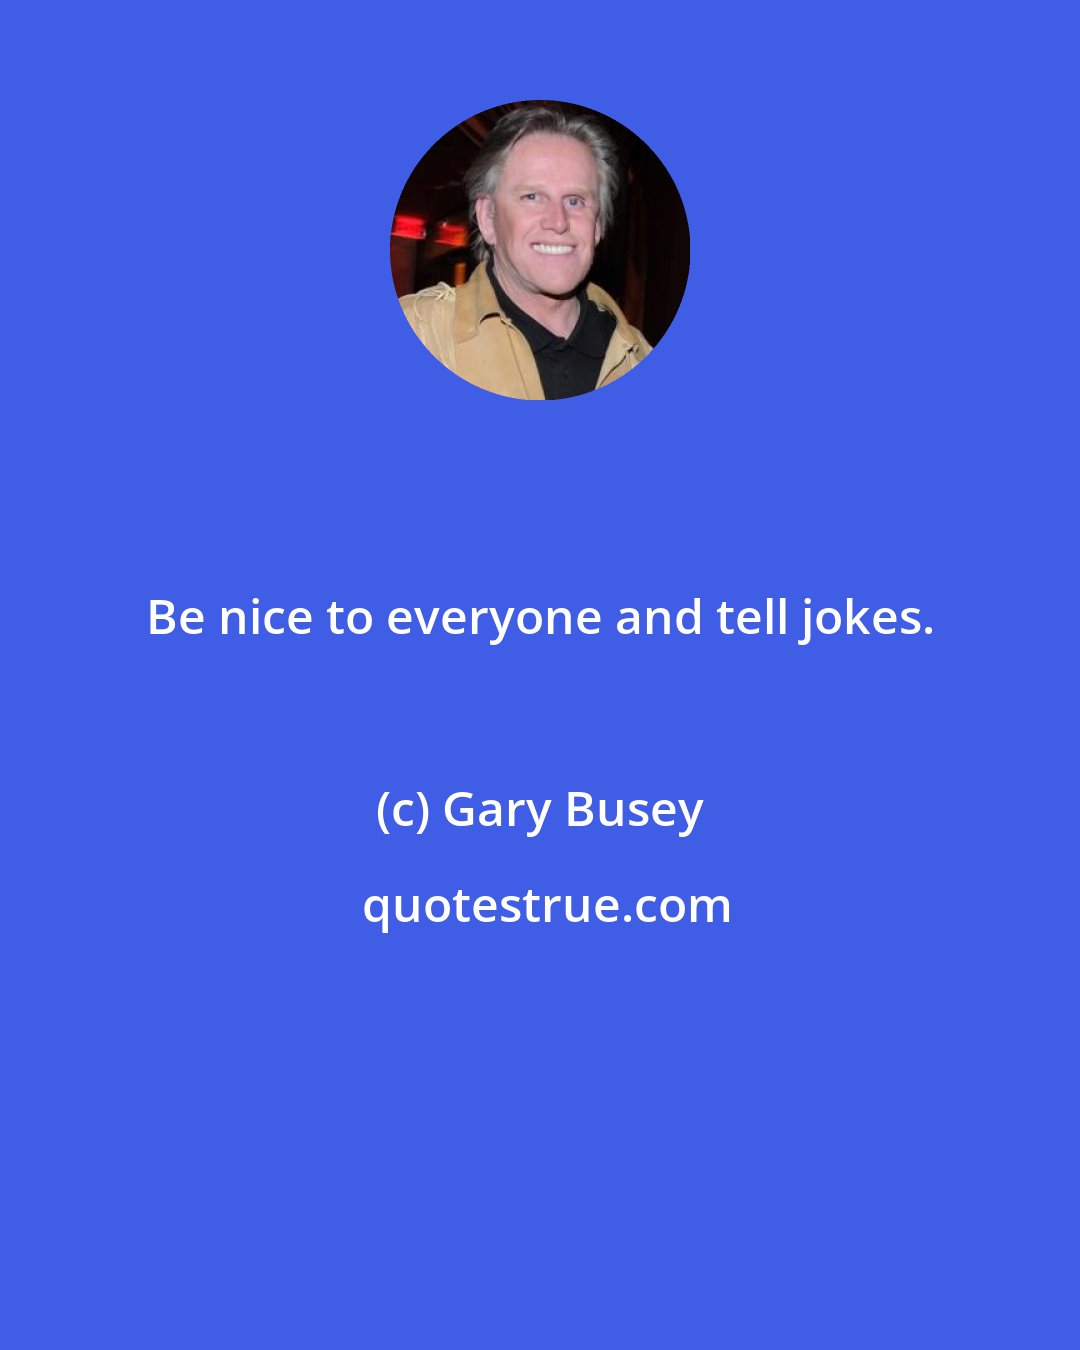 Gary Busey: Be nice to everyone and tell jokes.